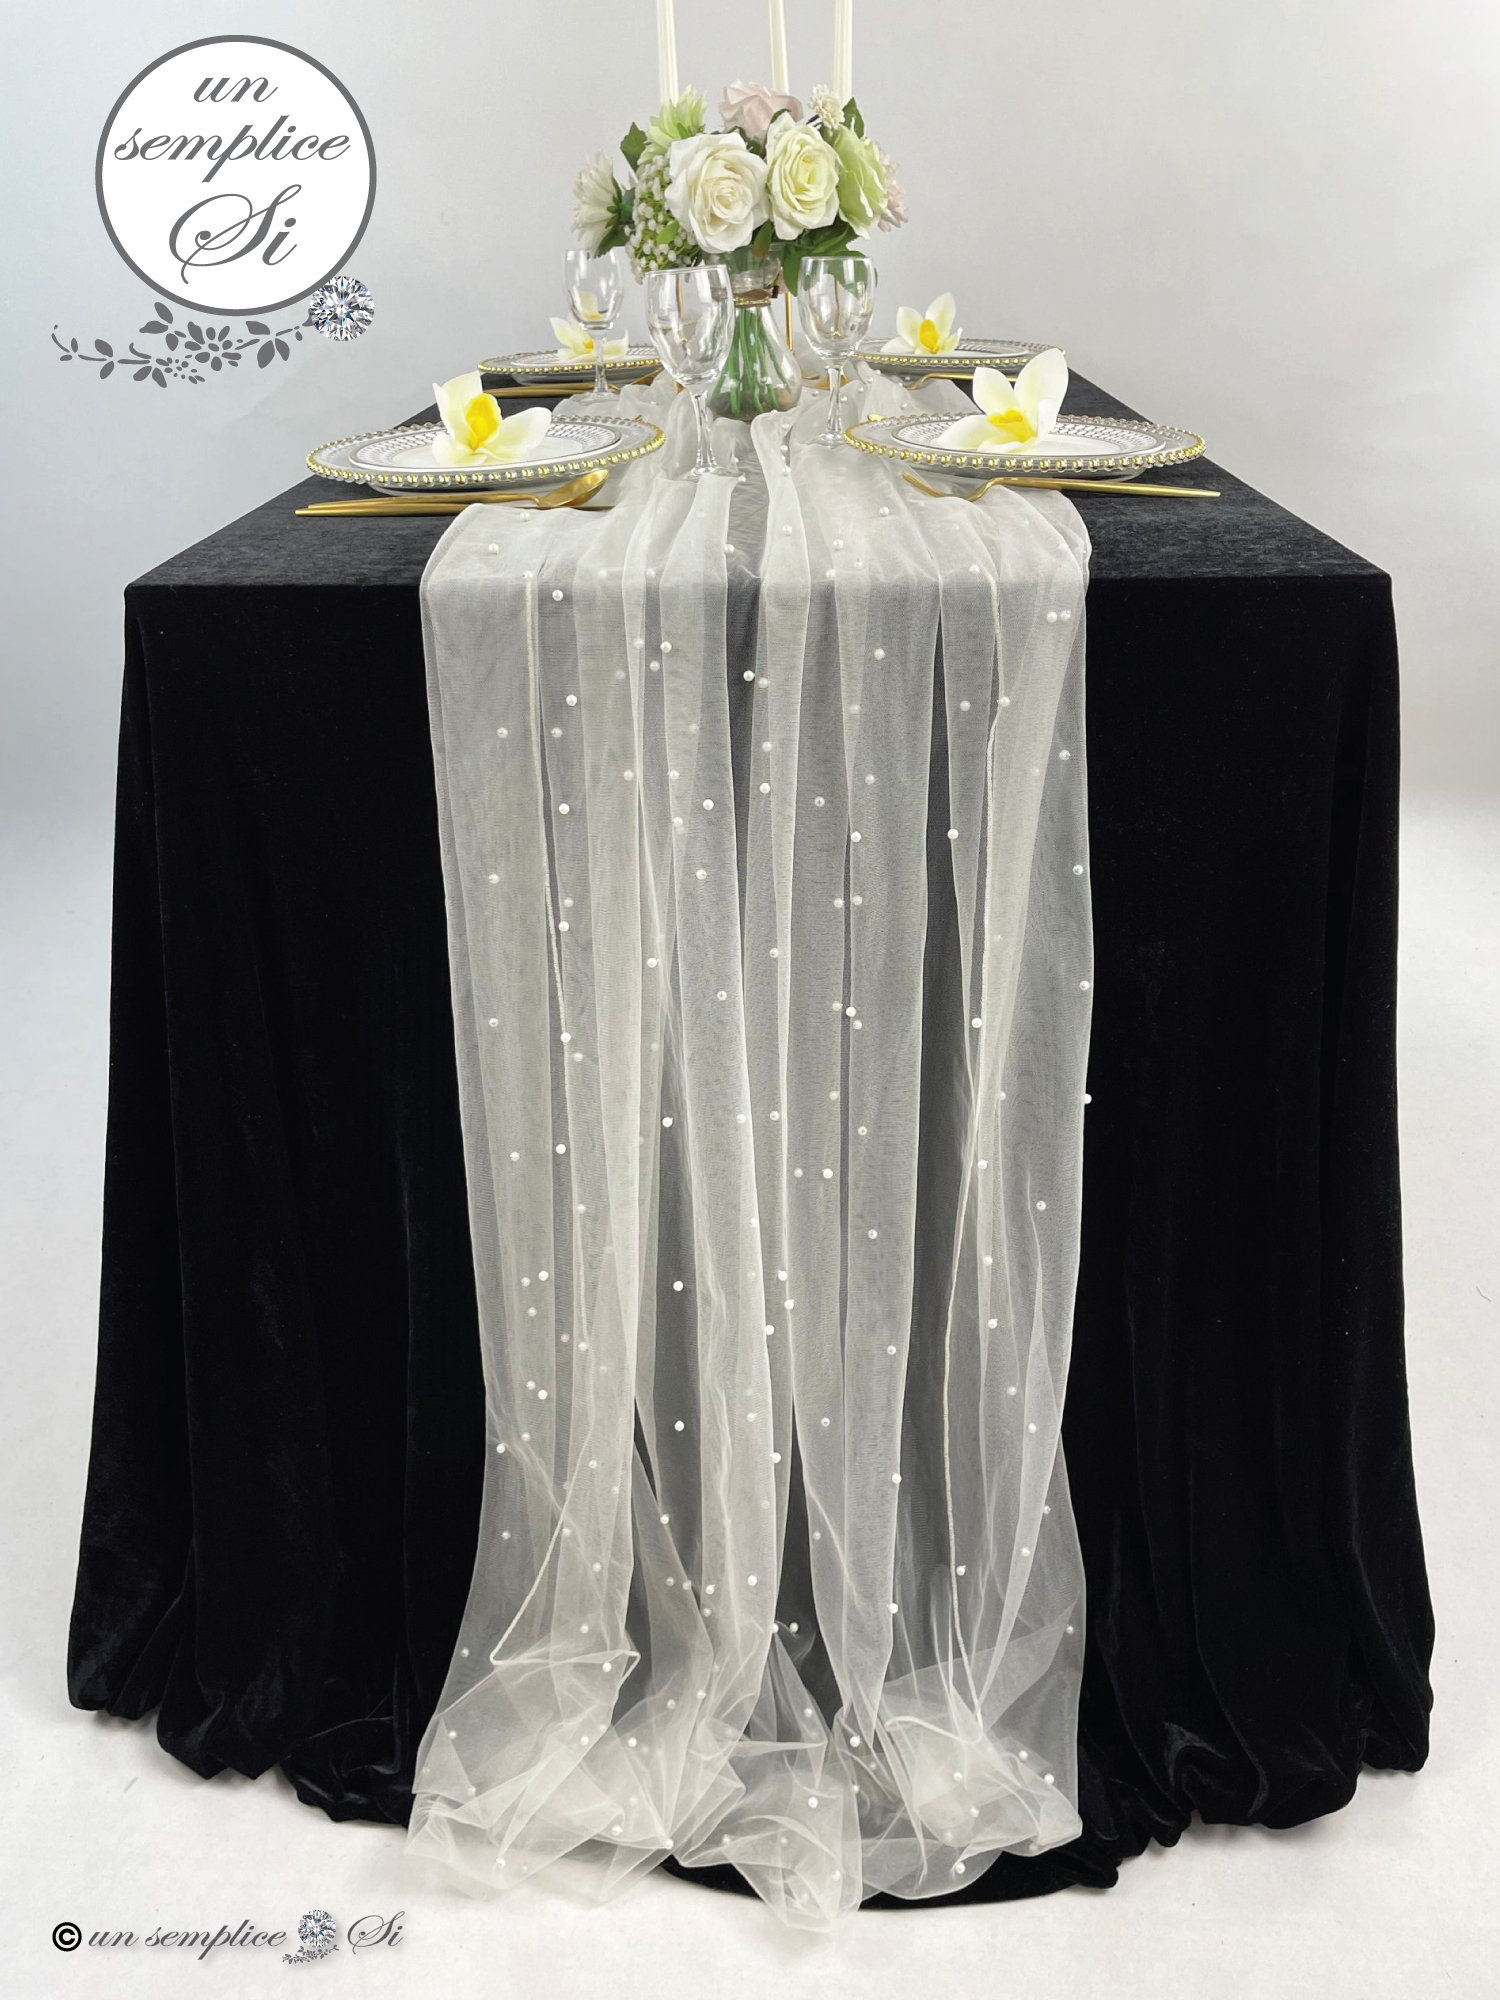 1pc White Tablecloth Pearl Tulle Tablecloth Wedding Veil Pearl Tulle Table  Runner Fabrics For Wedding Dessert Table Decorations, Fabric Romantic Lace